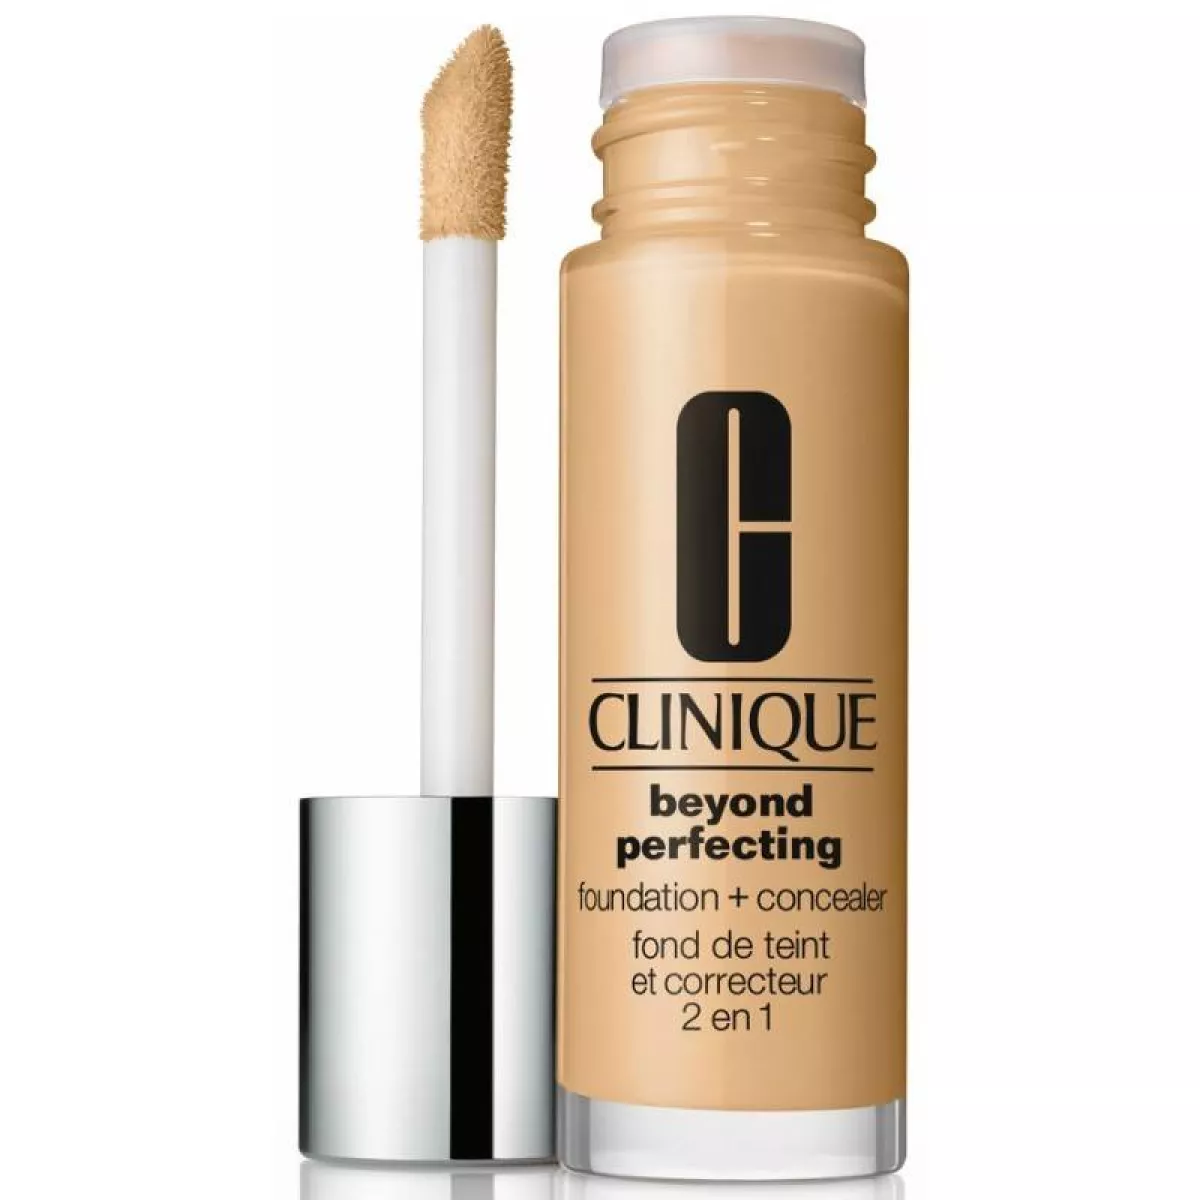 #1 - Clinique Beyond Perfecting Foundation + Concealer 30 ml - Cork